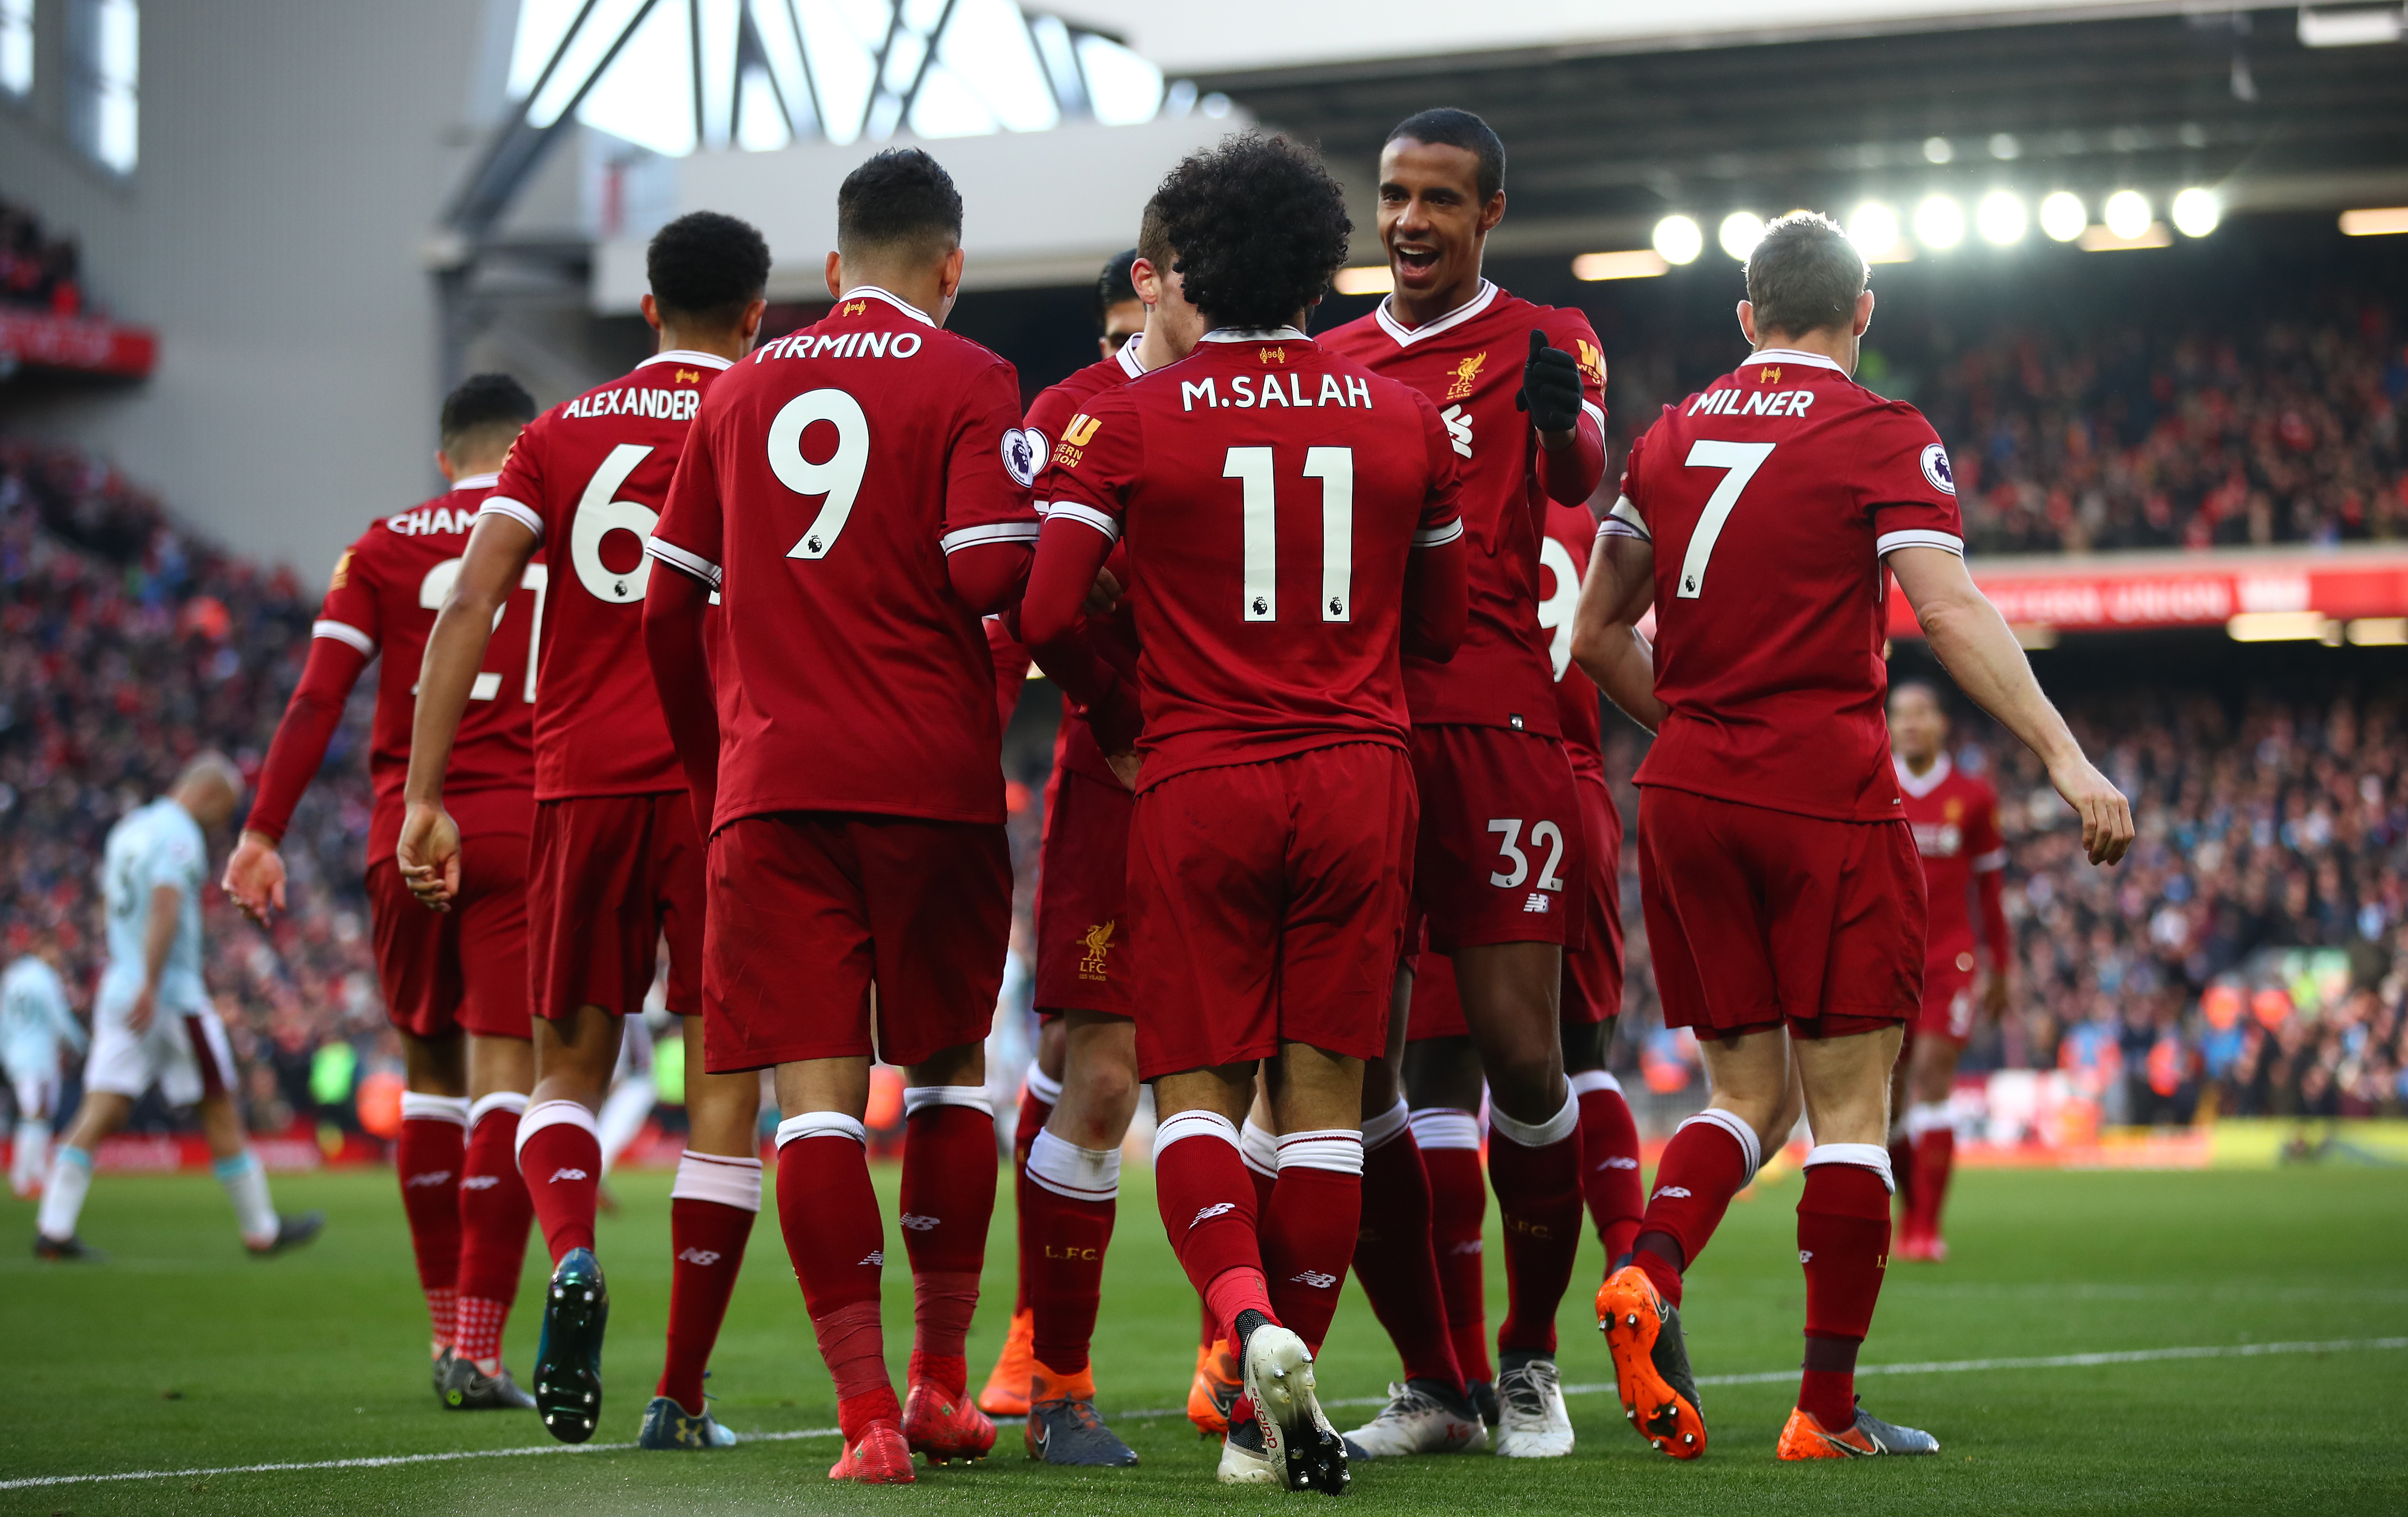 LIVERPOOL, ENGLAND - FEBRUARY 24:  Mohamed Salah of Liverpool celebrates scoring his side's second goal with team mate Joel Matip during the Premier League match between Liverpool and West Ham United at Anfield on February 24, 2018 in Liverpool, England.  (Photo by Clive Brunskill/Getty Images)